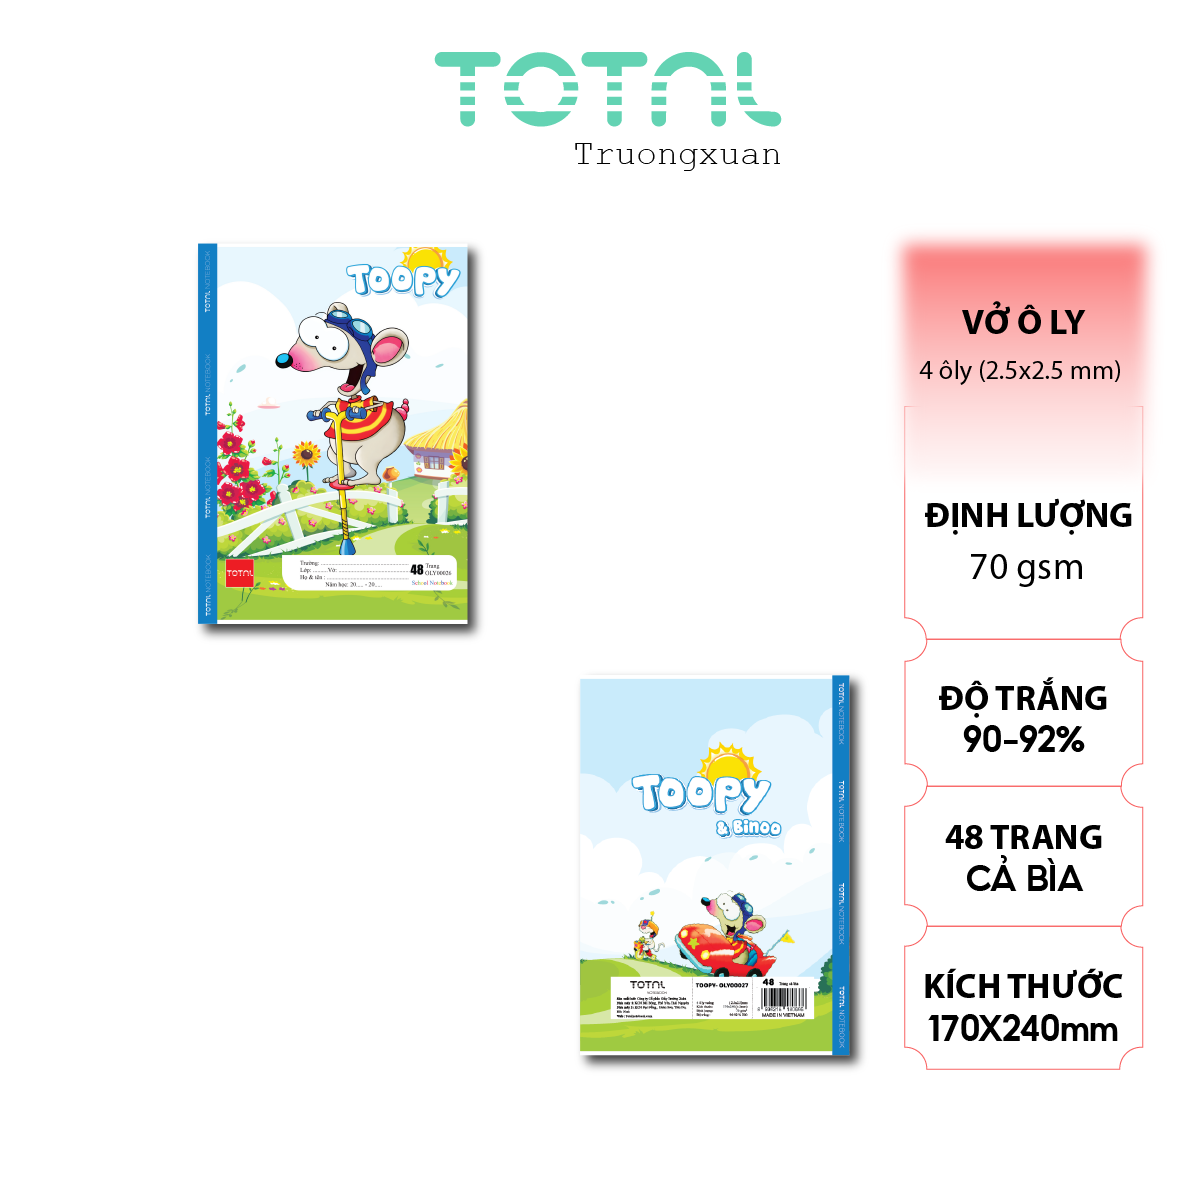 Vở oly Total Toopy 48 trang 4 ôly